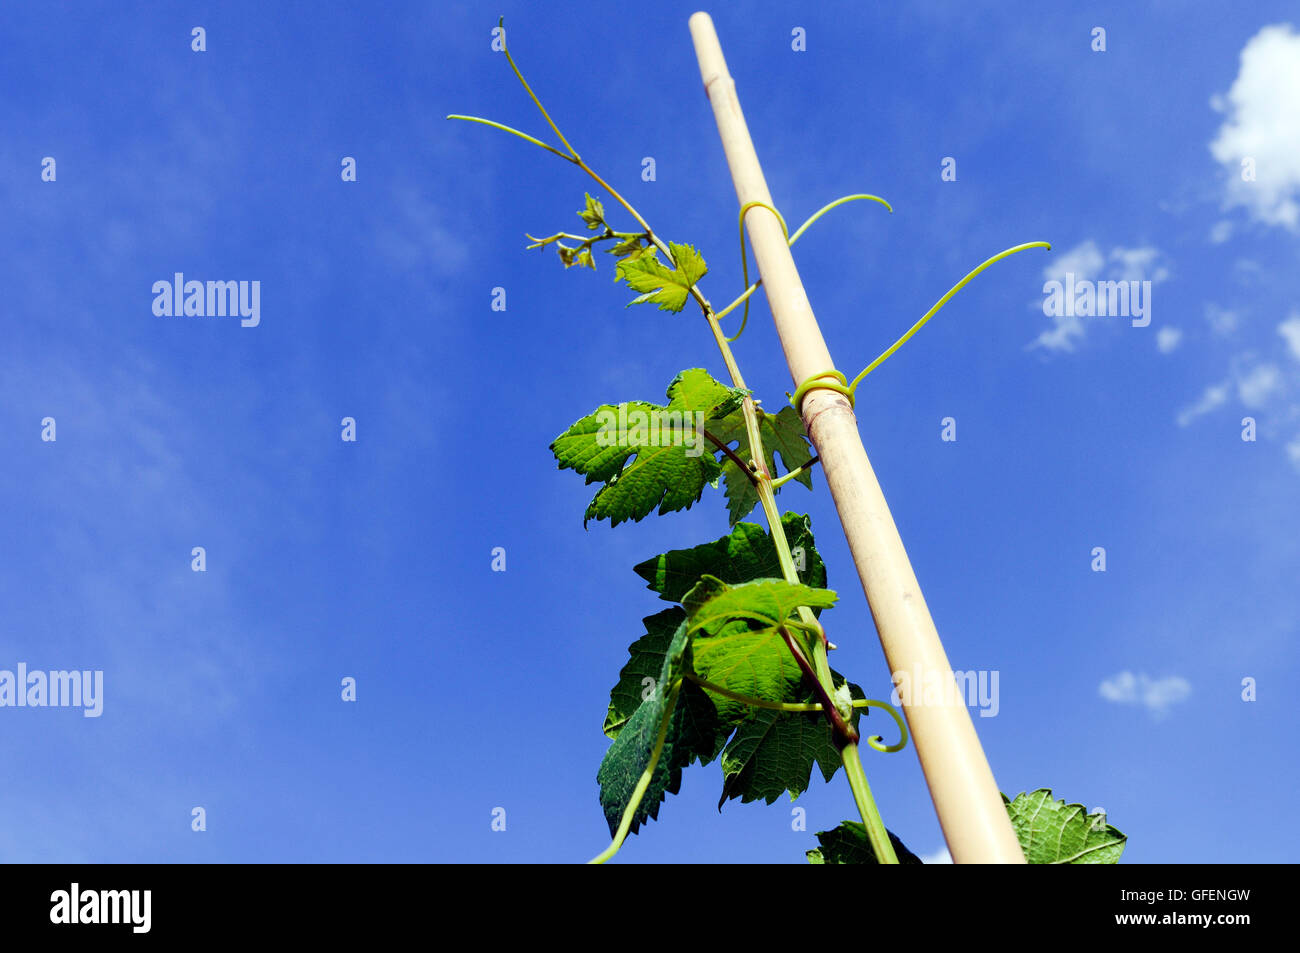 Israel, Negev, Lachish Region, young grape vines in a Vineyard, Stock Photo